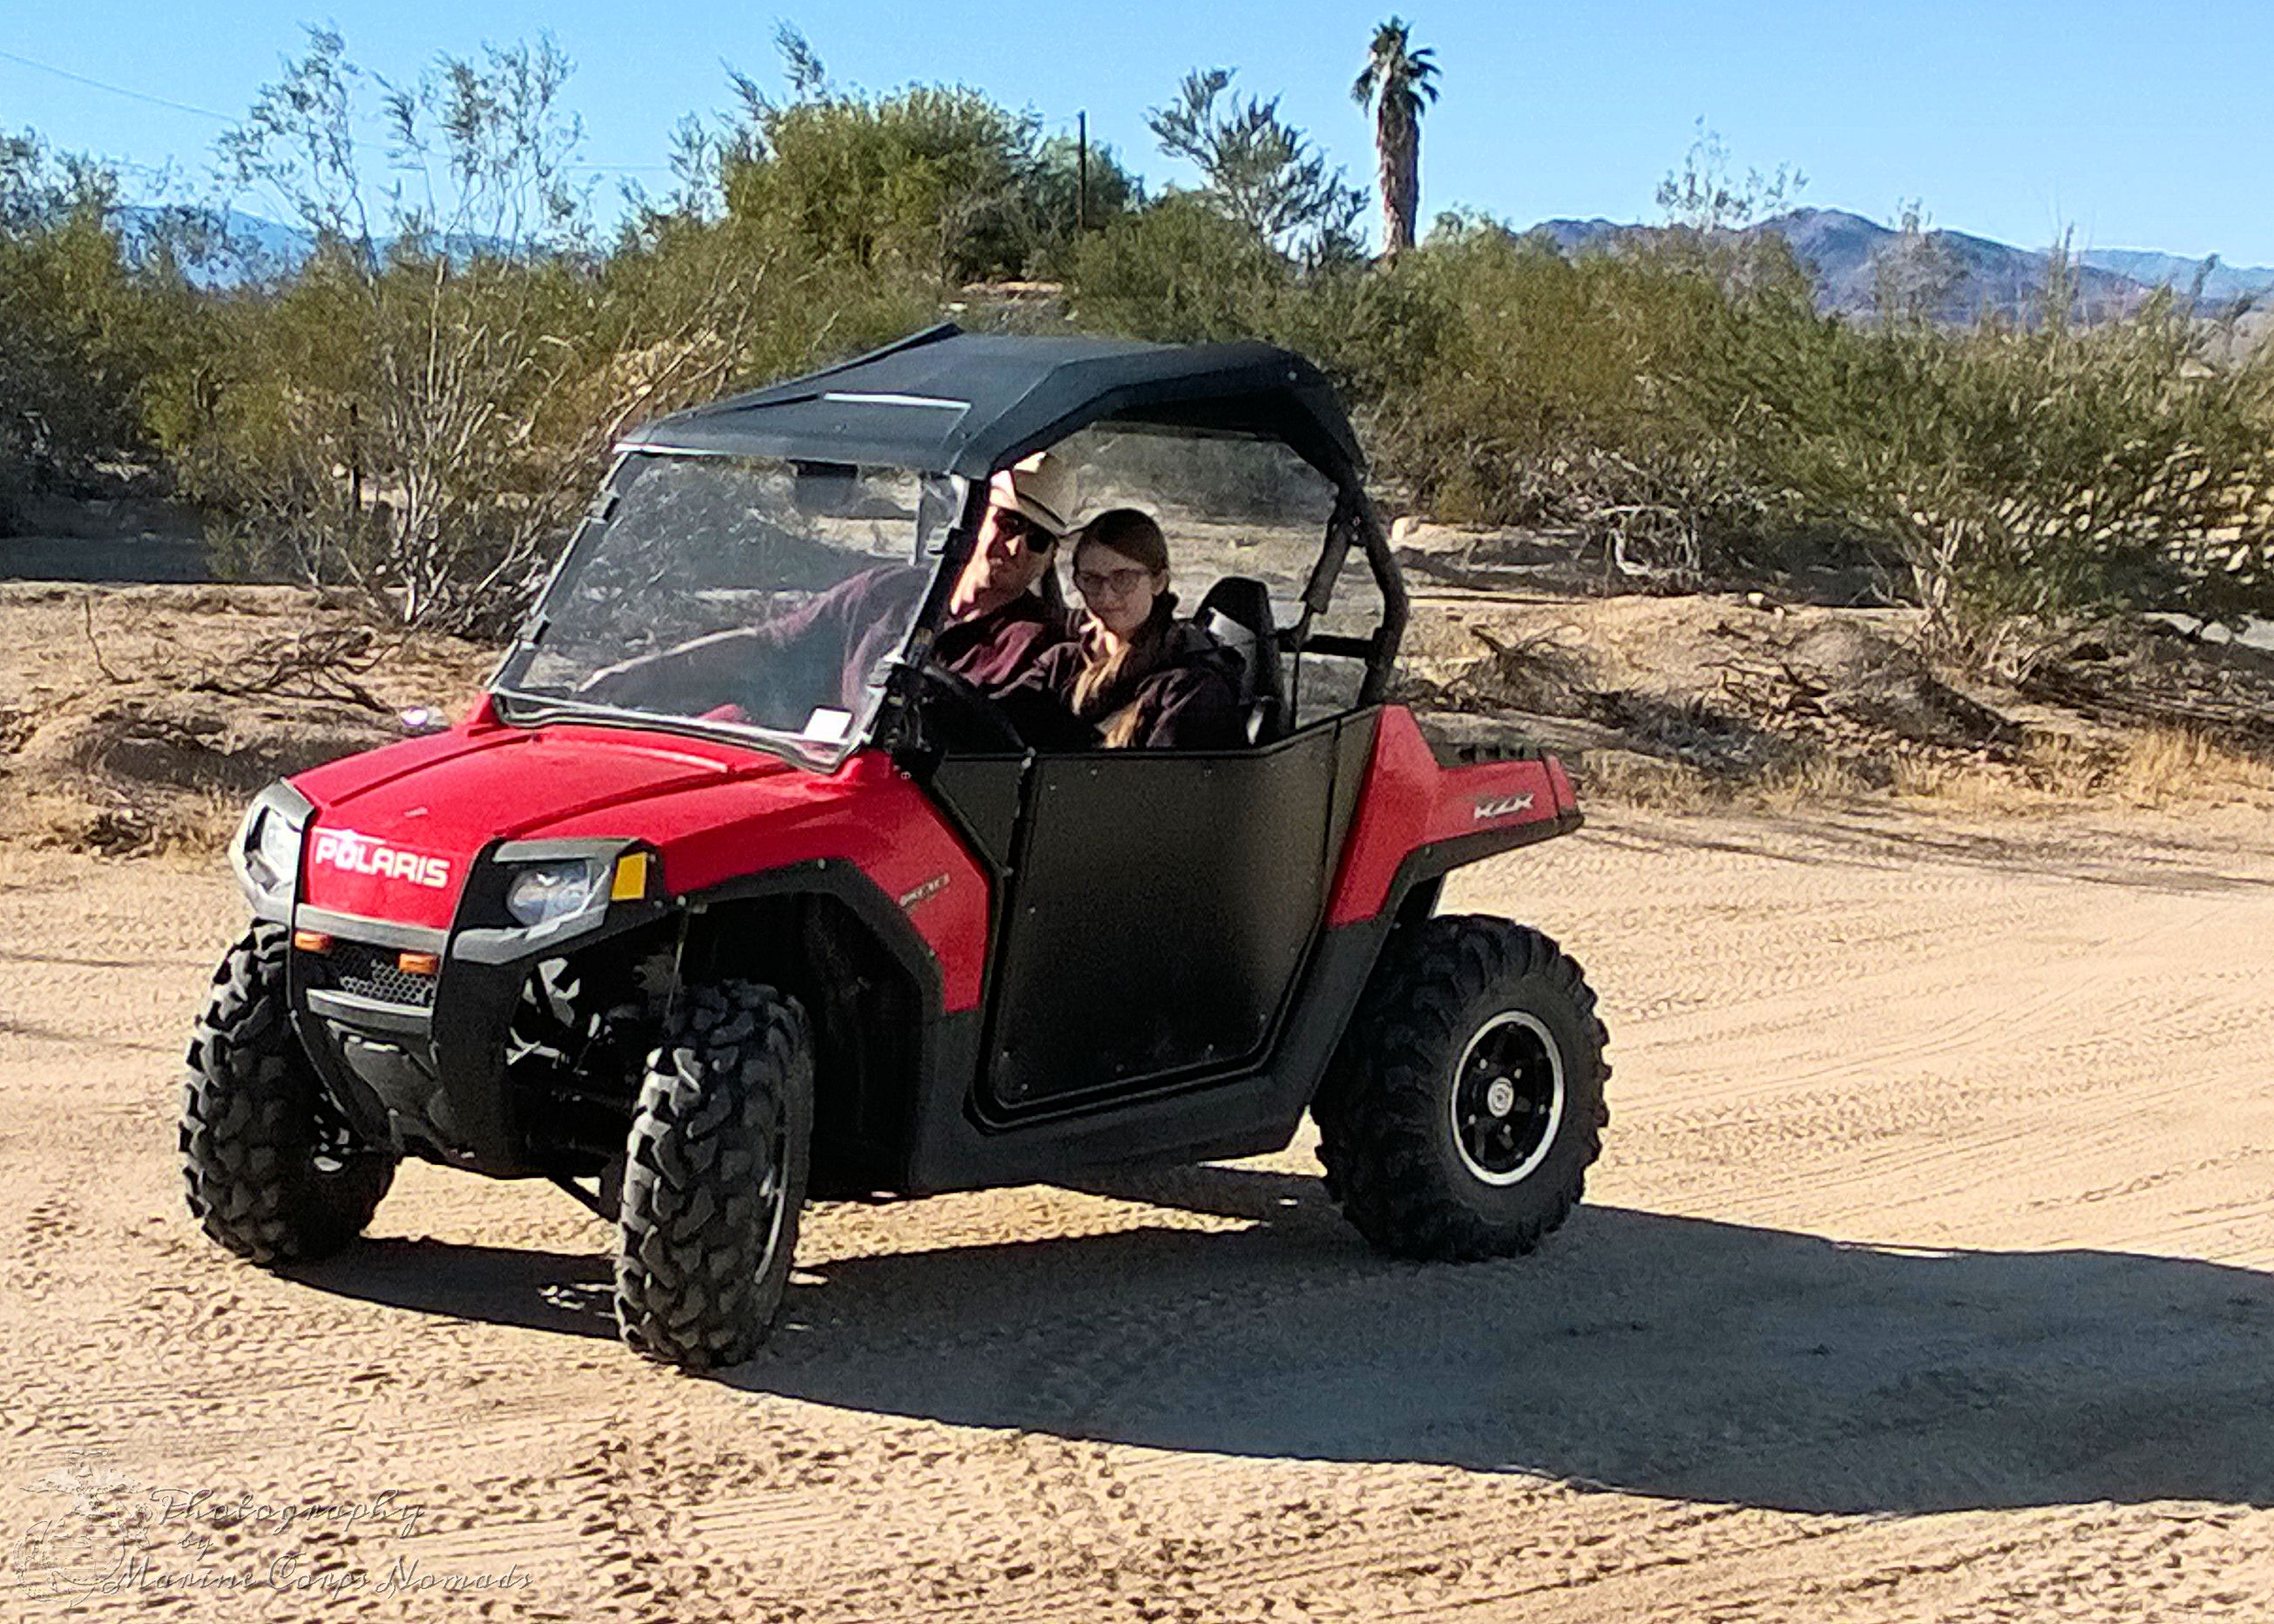 Testing out the new RZR Doors